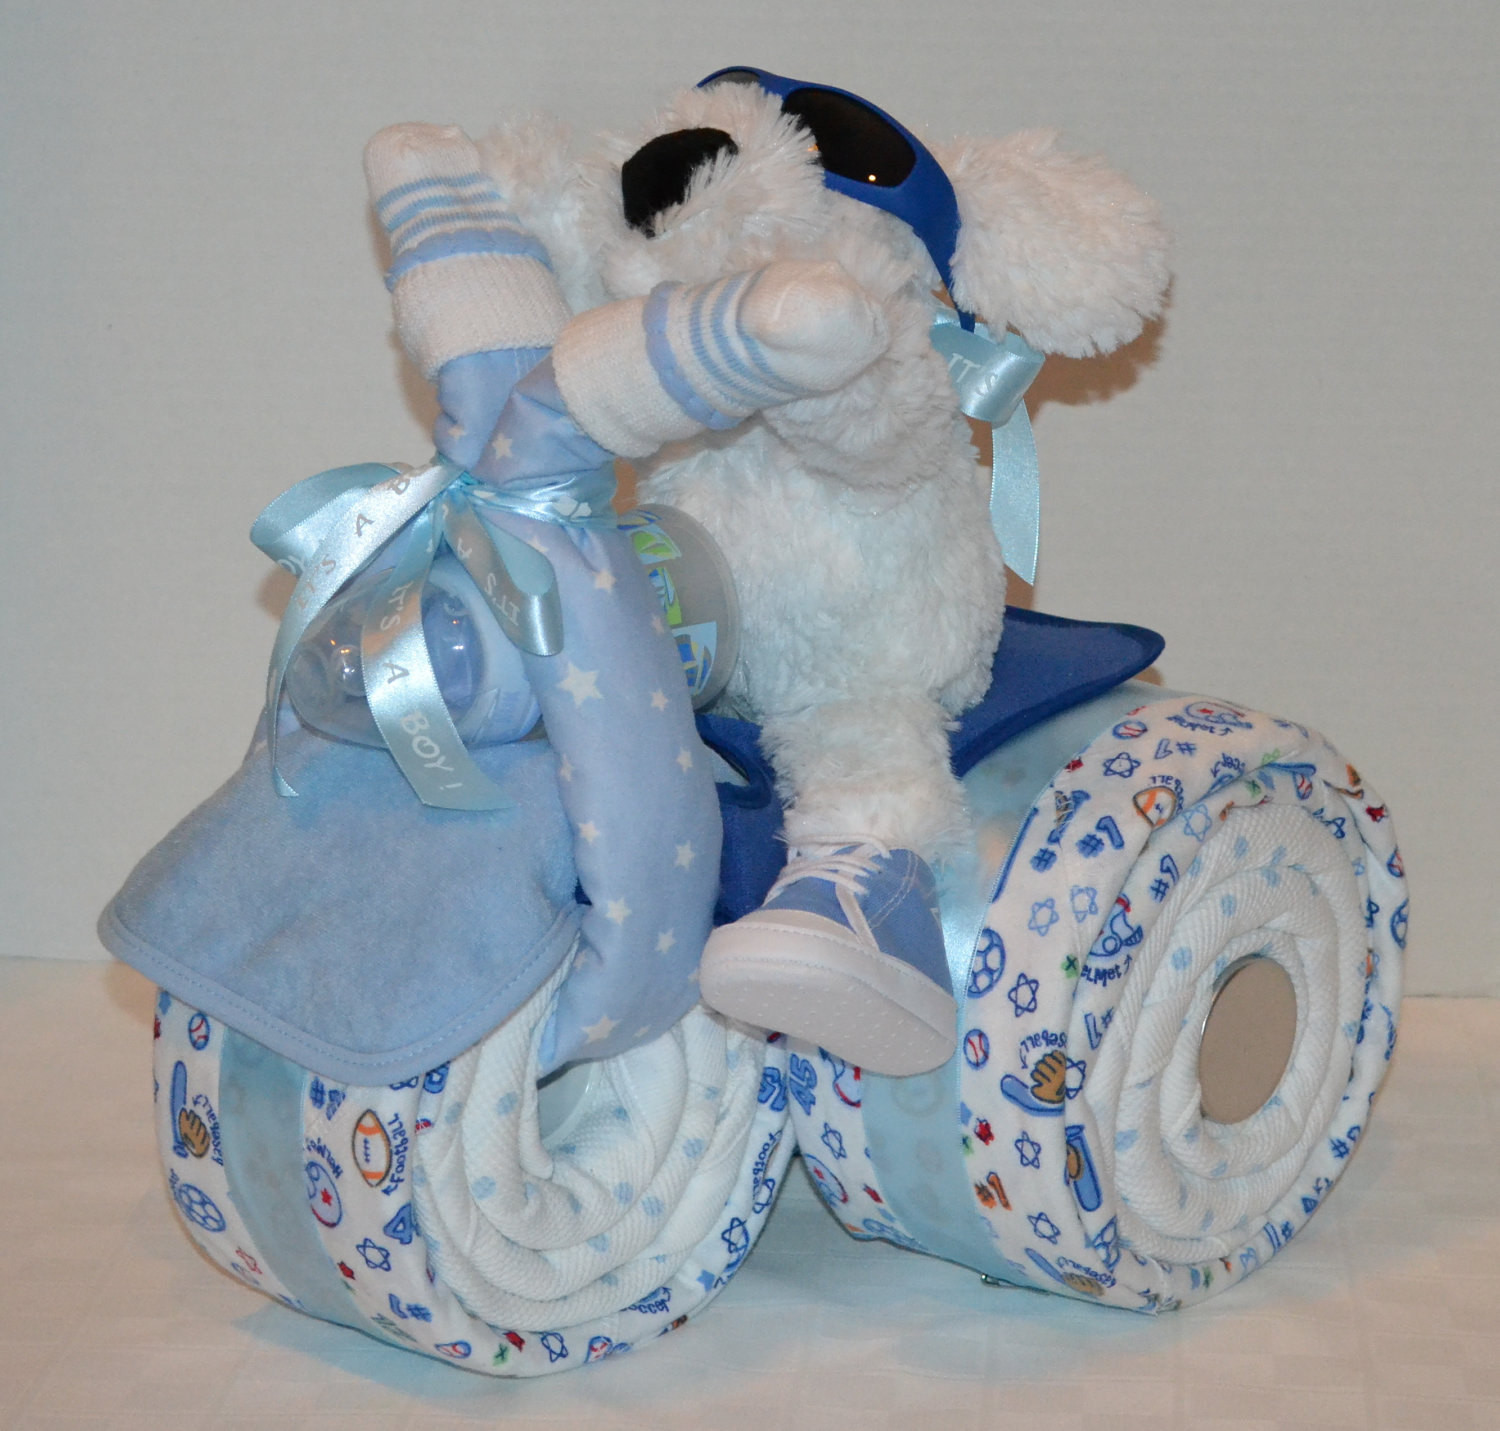 Baby Shower Gift Ideas For A Boy
 Tricycle Trike Diaper Cake Baby Shower Gift Sports theme